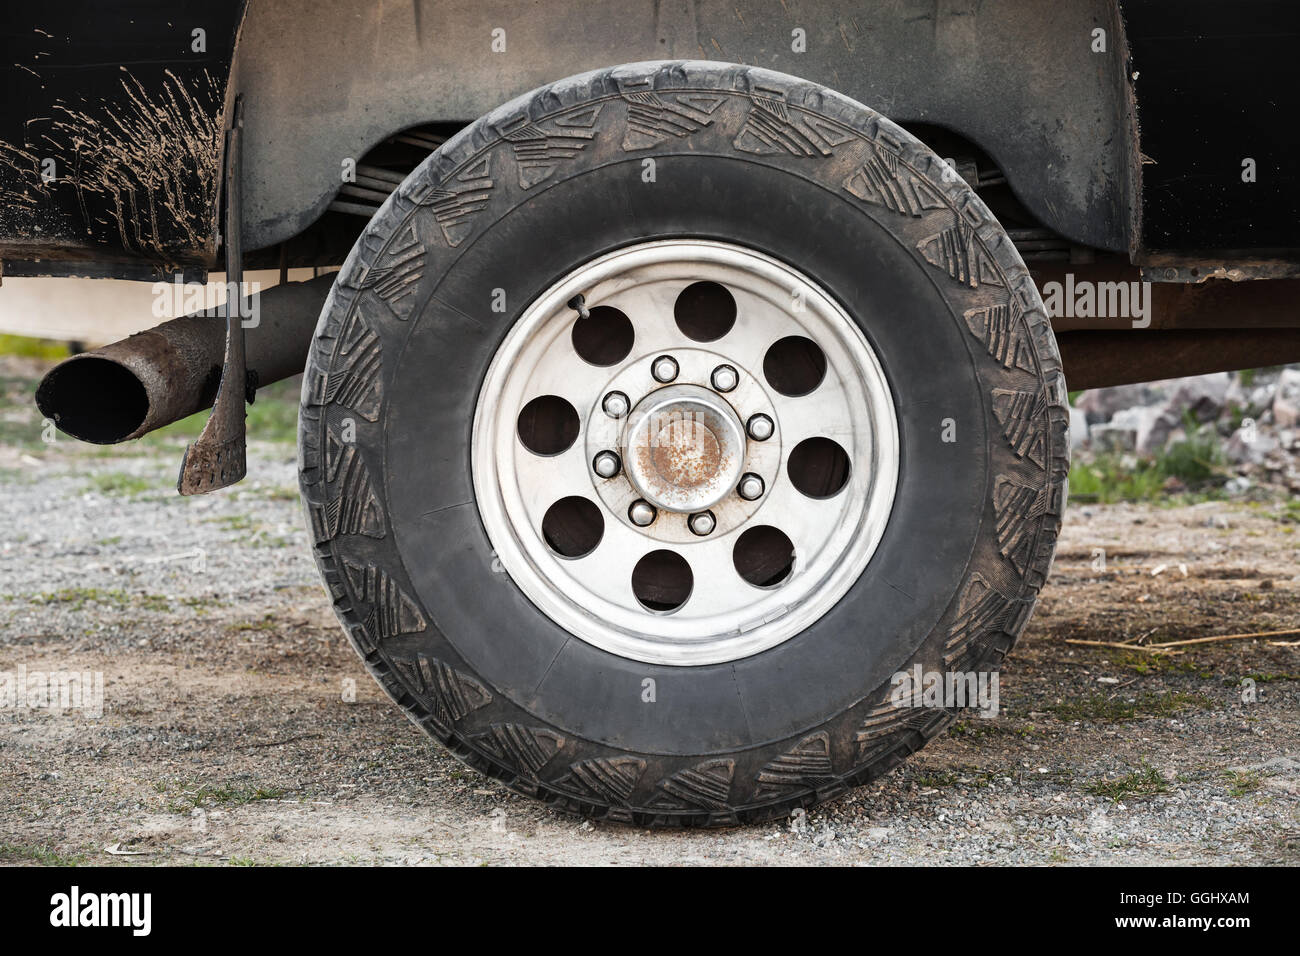 SUV car wheel on dirty rural road, front view Stock Photo